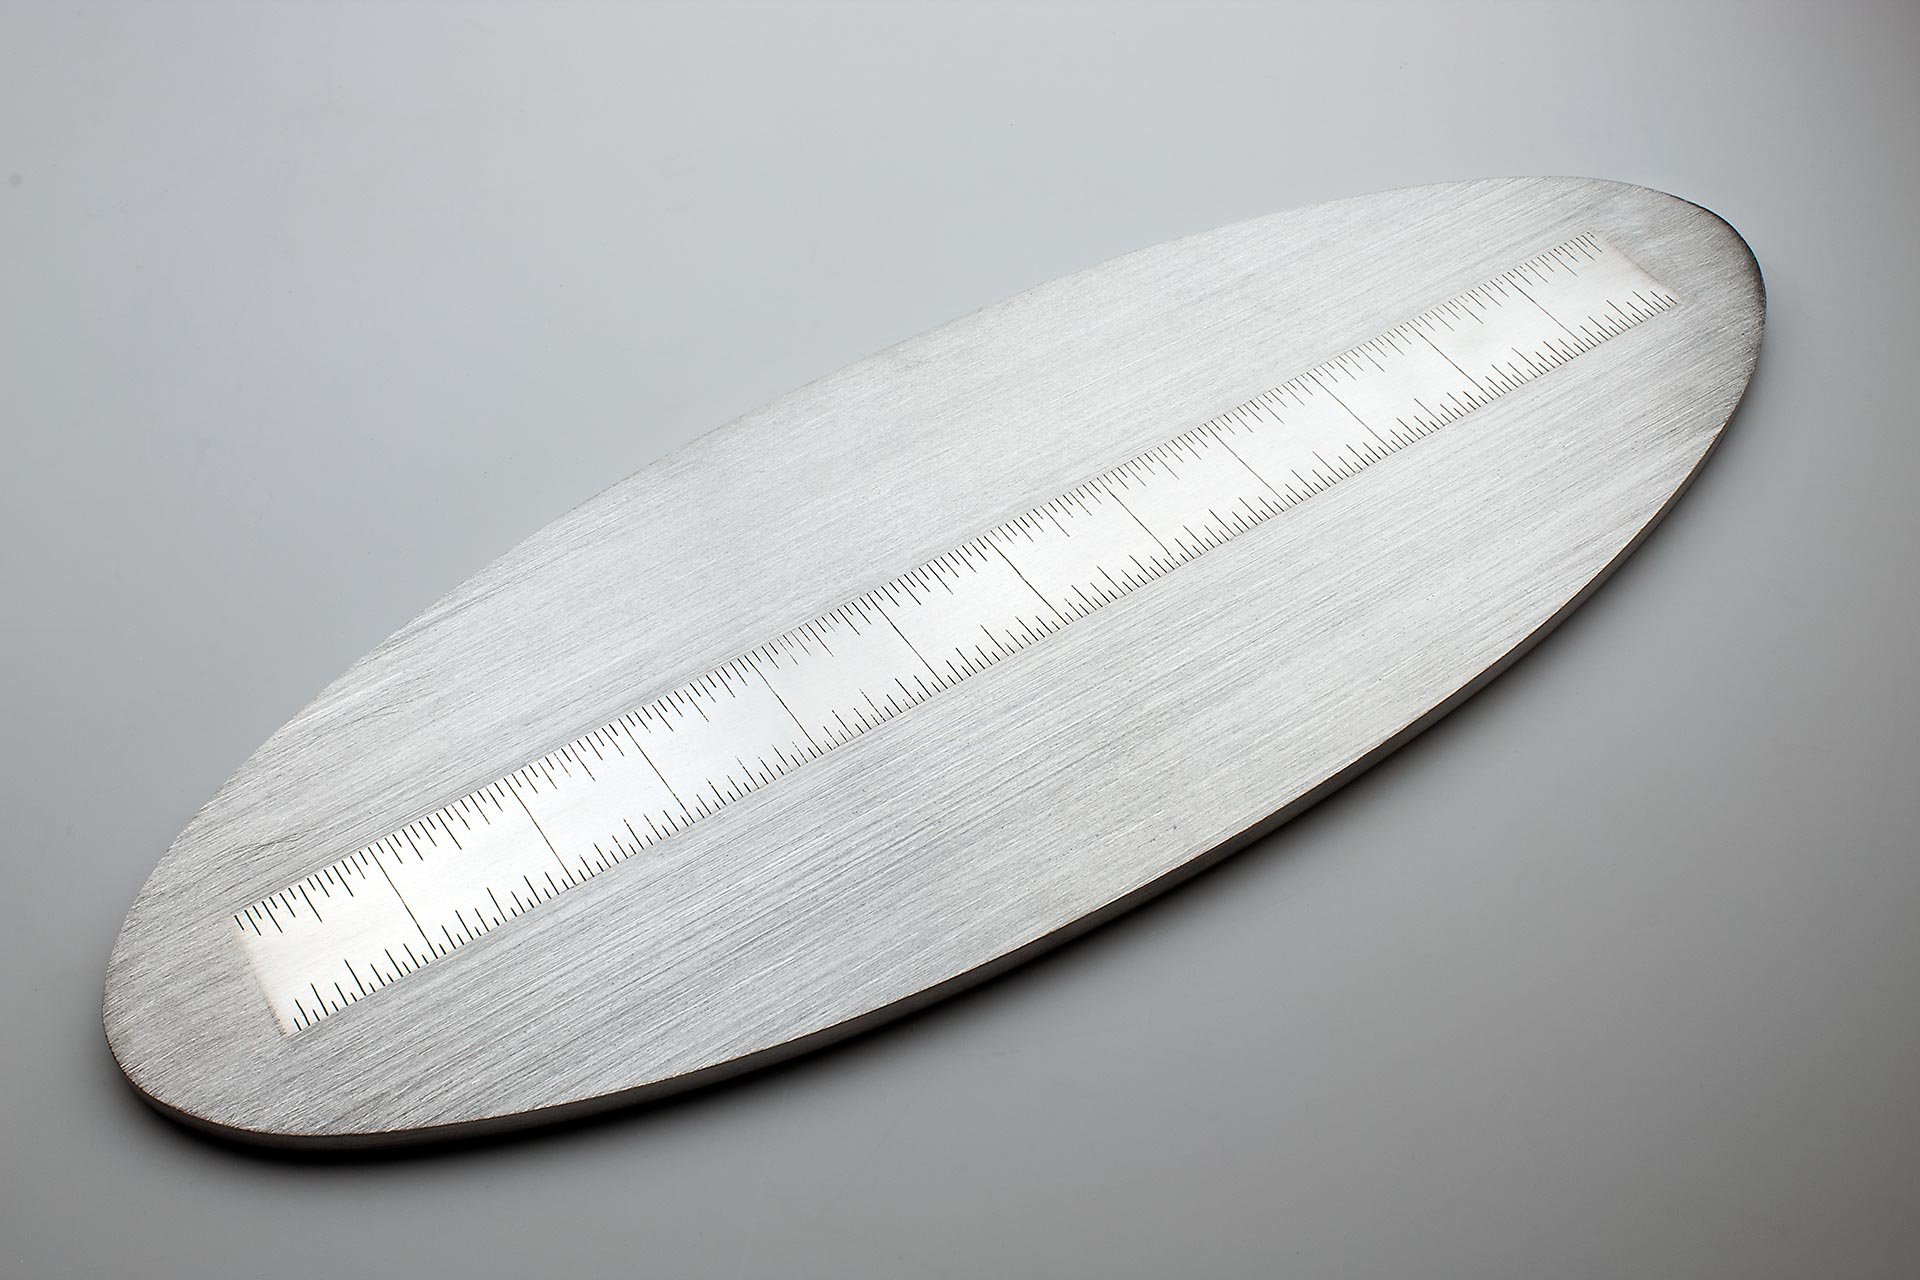 Instrument #79, hand engraved aluminum and ink, 14" x 5.25" x .25"